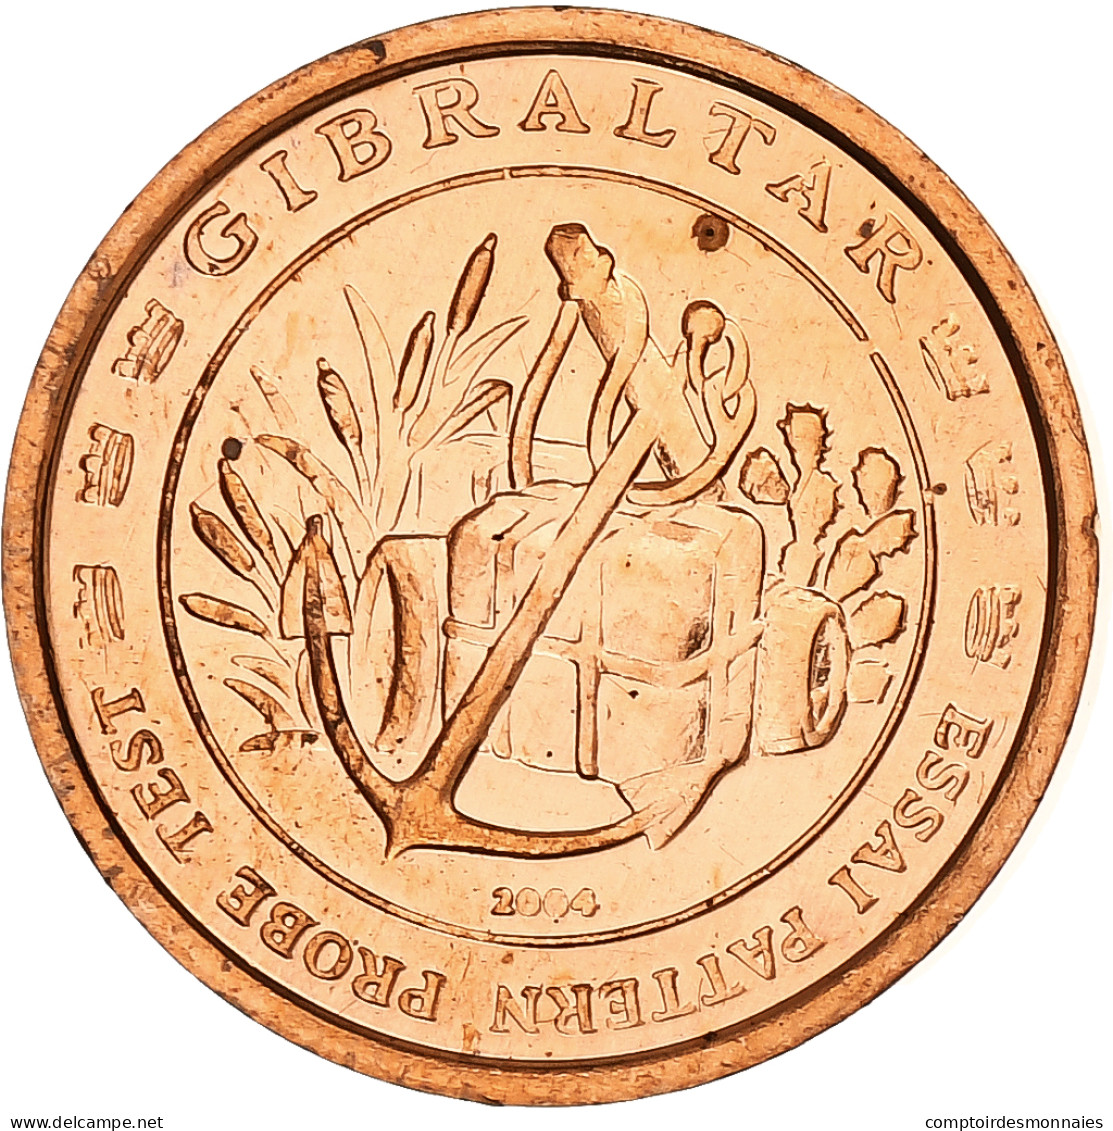 Gibraltar, 2 Euro Cent, Fantasy Euro Patterns, Essai-Trial, BE, 2004, Cuivre - Private Proofs / Unofficial